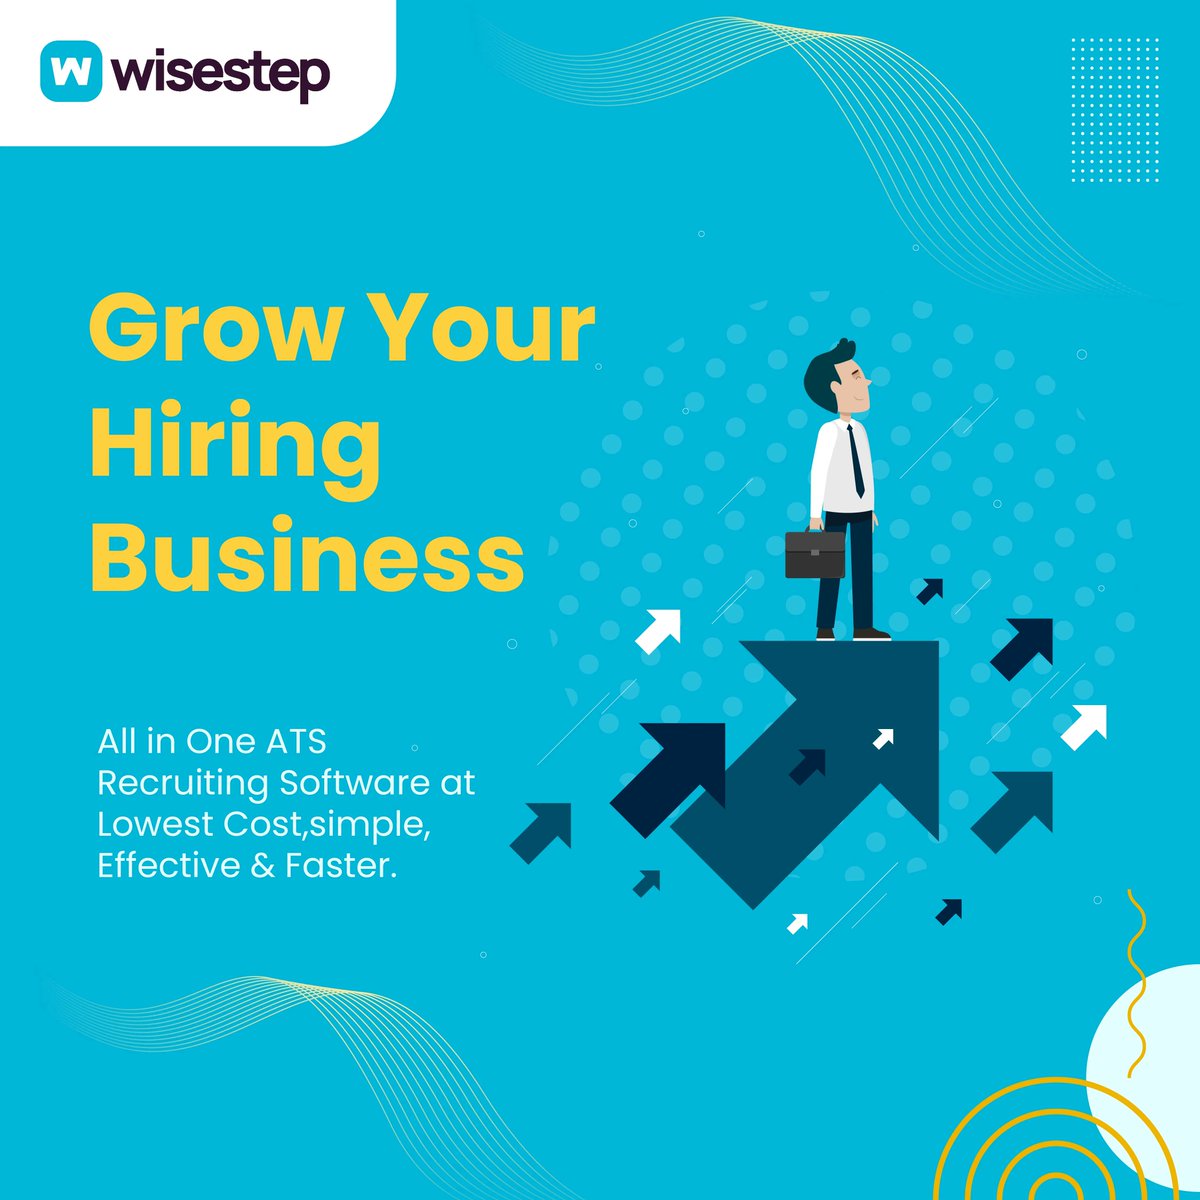 Boost your recruitment business with Wisestep ATS. With Wisesteps's advanced features make your hiring  process more organized and streamlined 

Book a demo now to know more about Wisestep ATS

buff.ly/3SywYr8

 #recruitment #hiring #WisestepATS #applicanttrackingsystem